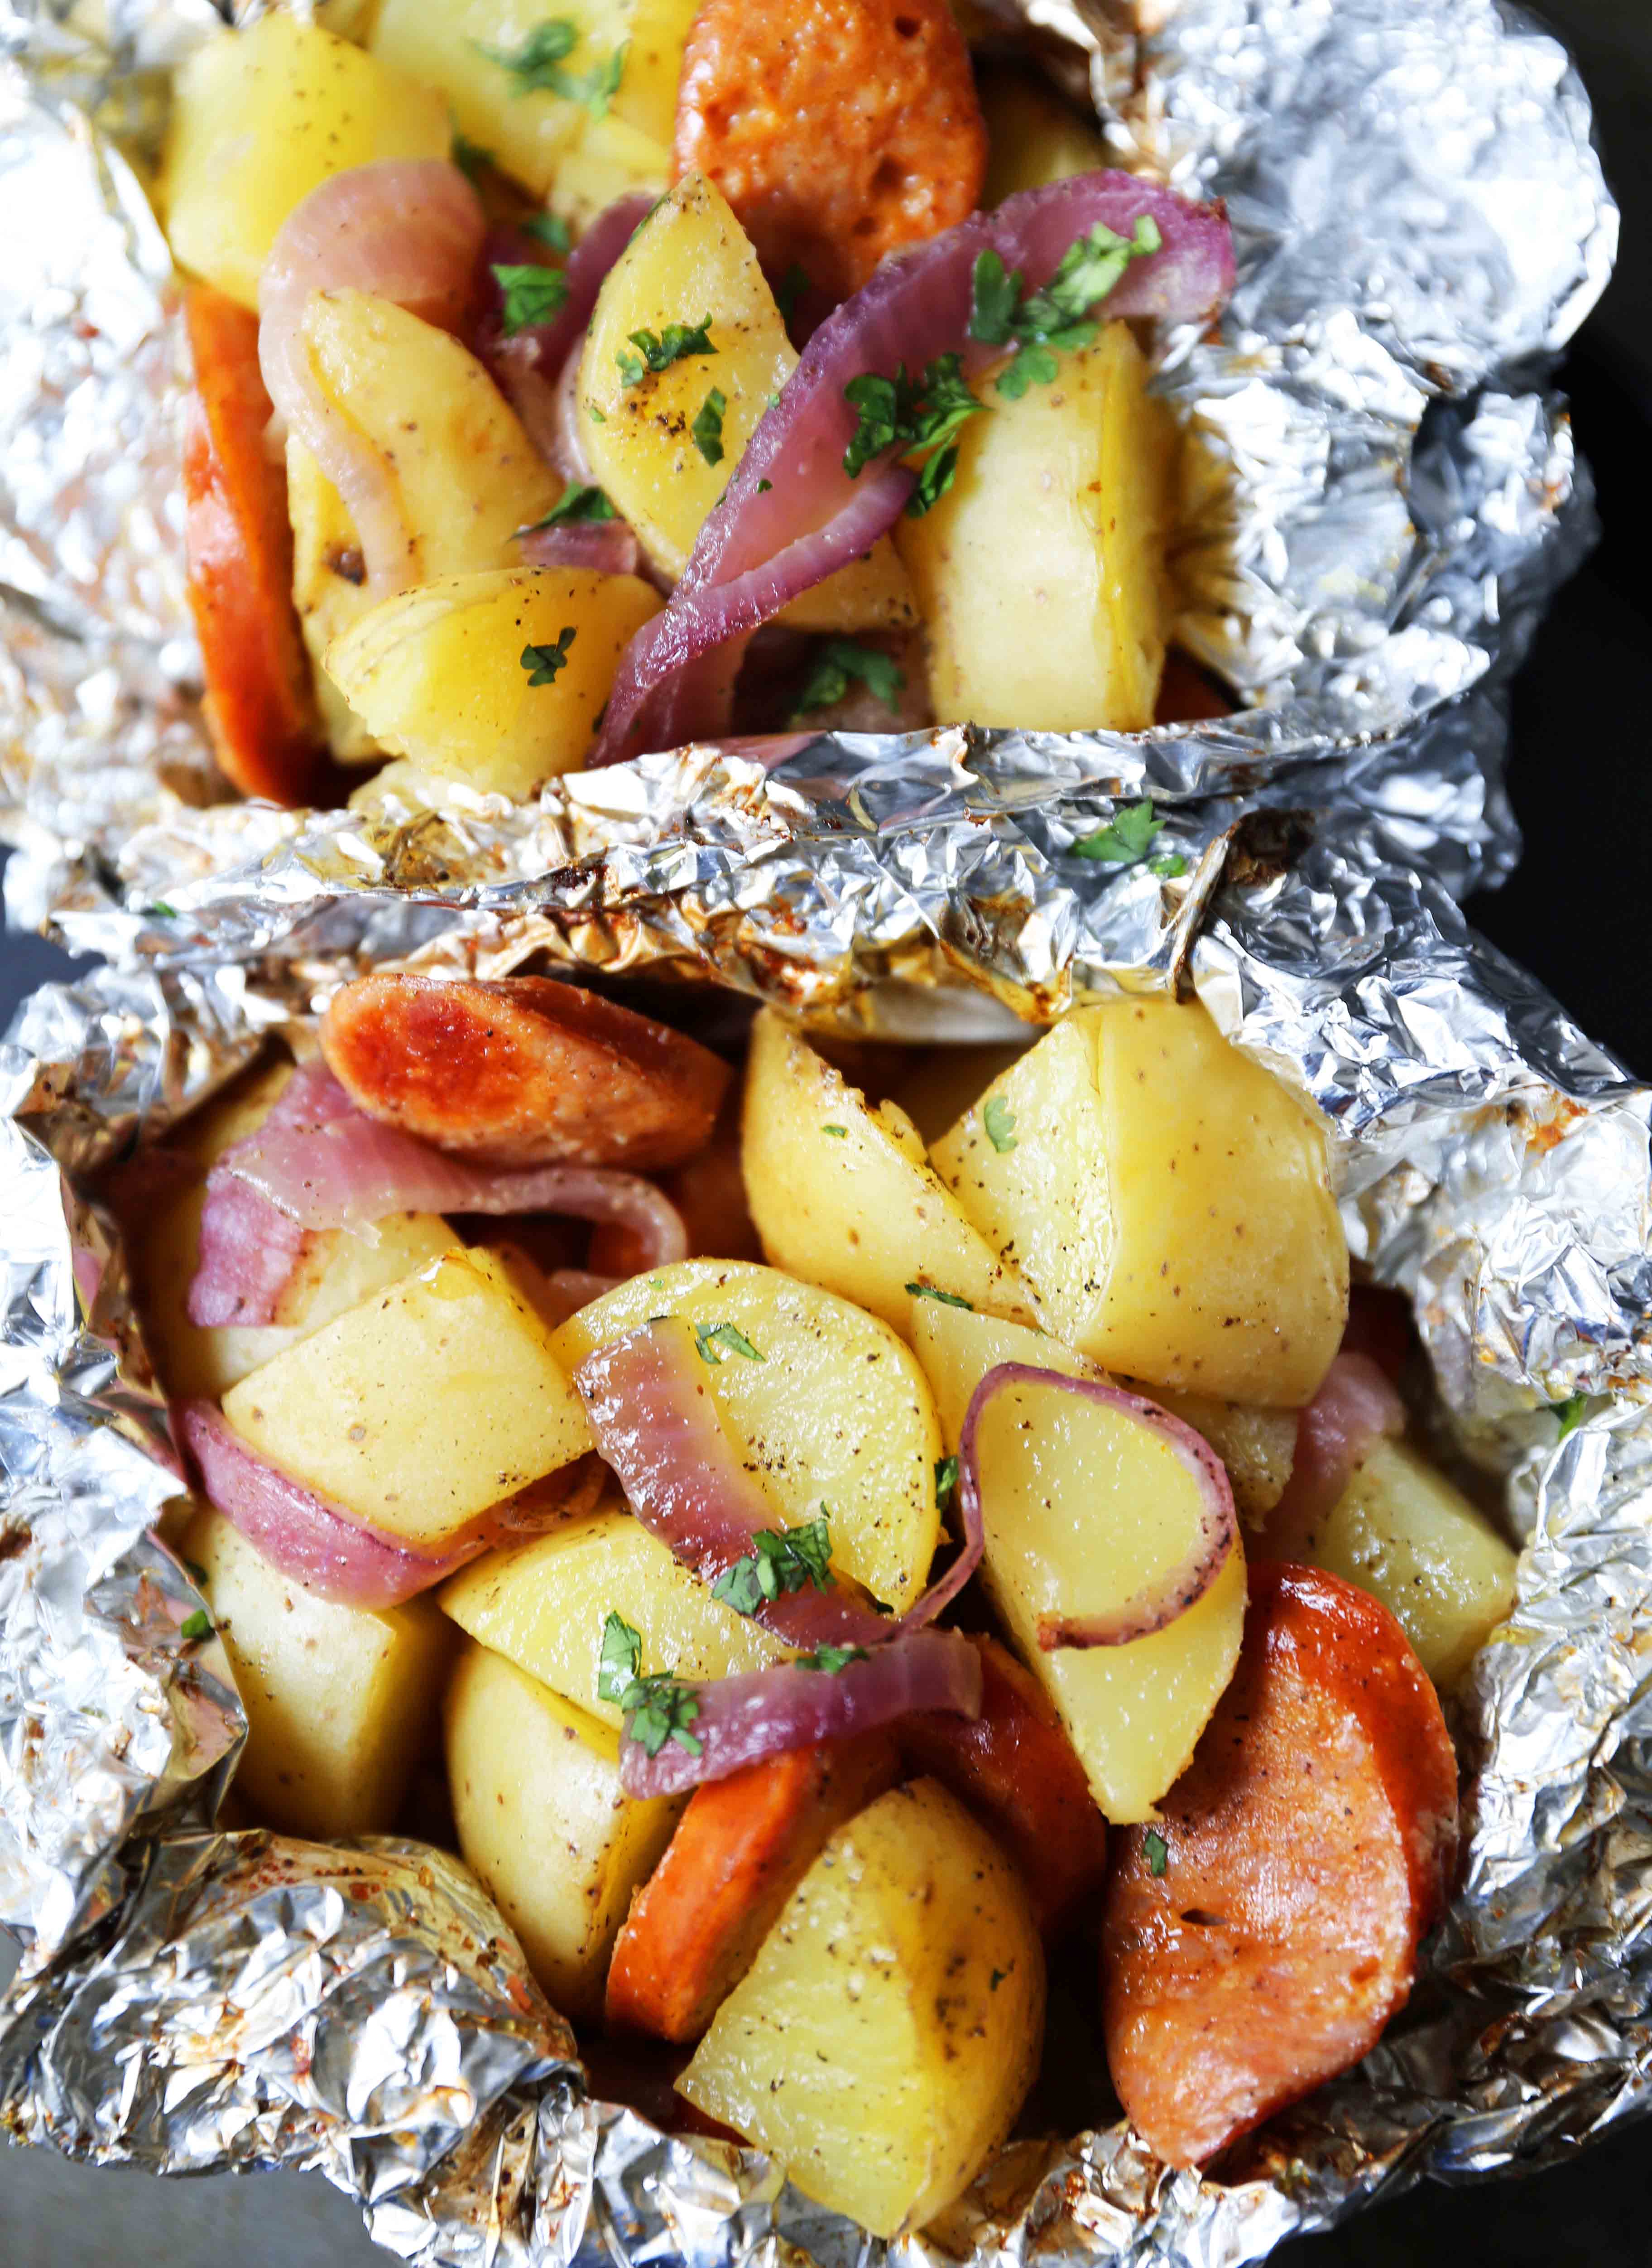 Sausage Potato Foil Packets The modern tin-foil dinner with hardwood smoked sausage and creamy gold potatoes. An easy and flavor-packed dinner. Foil packets cooked in the oven. #tinfoildinners #foilpackets #sausagepotatoes #sausagepotatofoilpackets #ovenfoilpackets